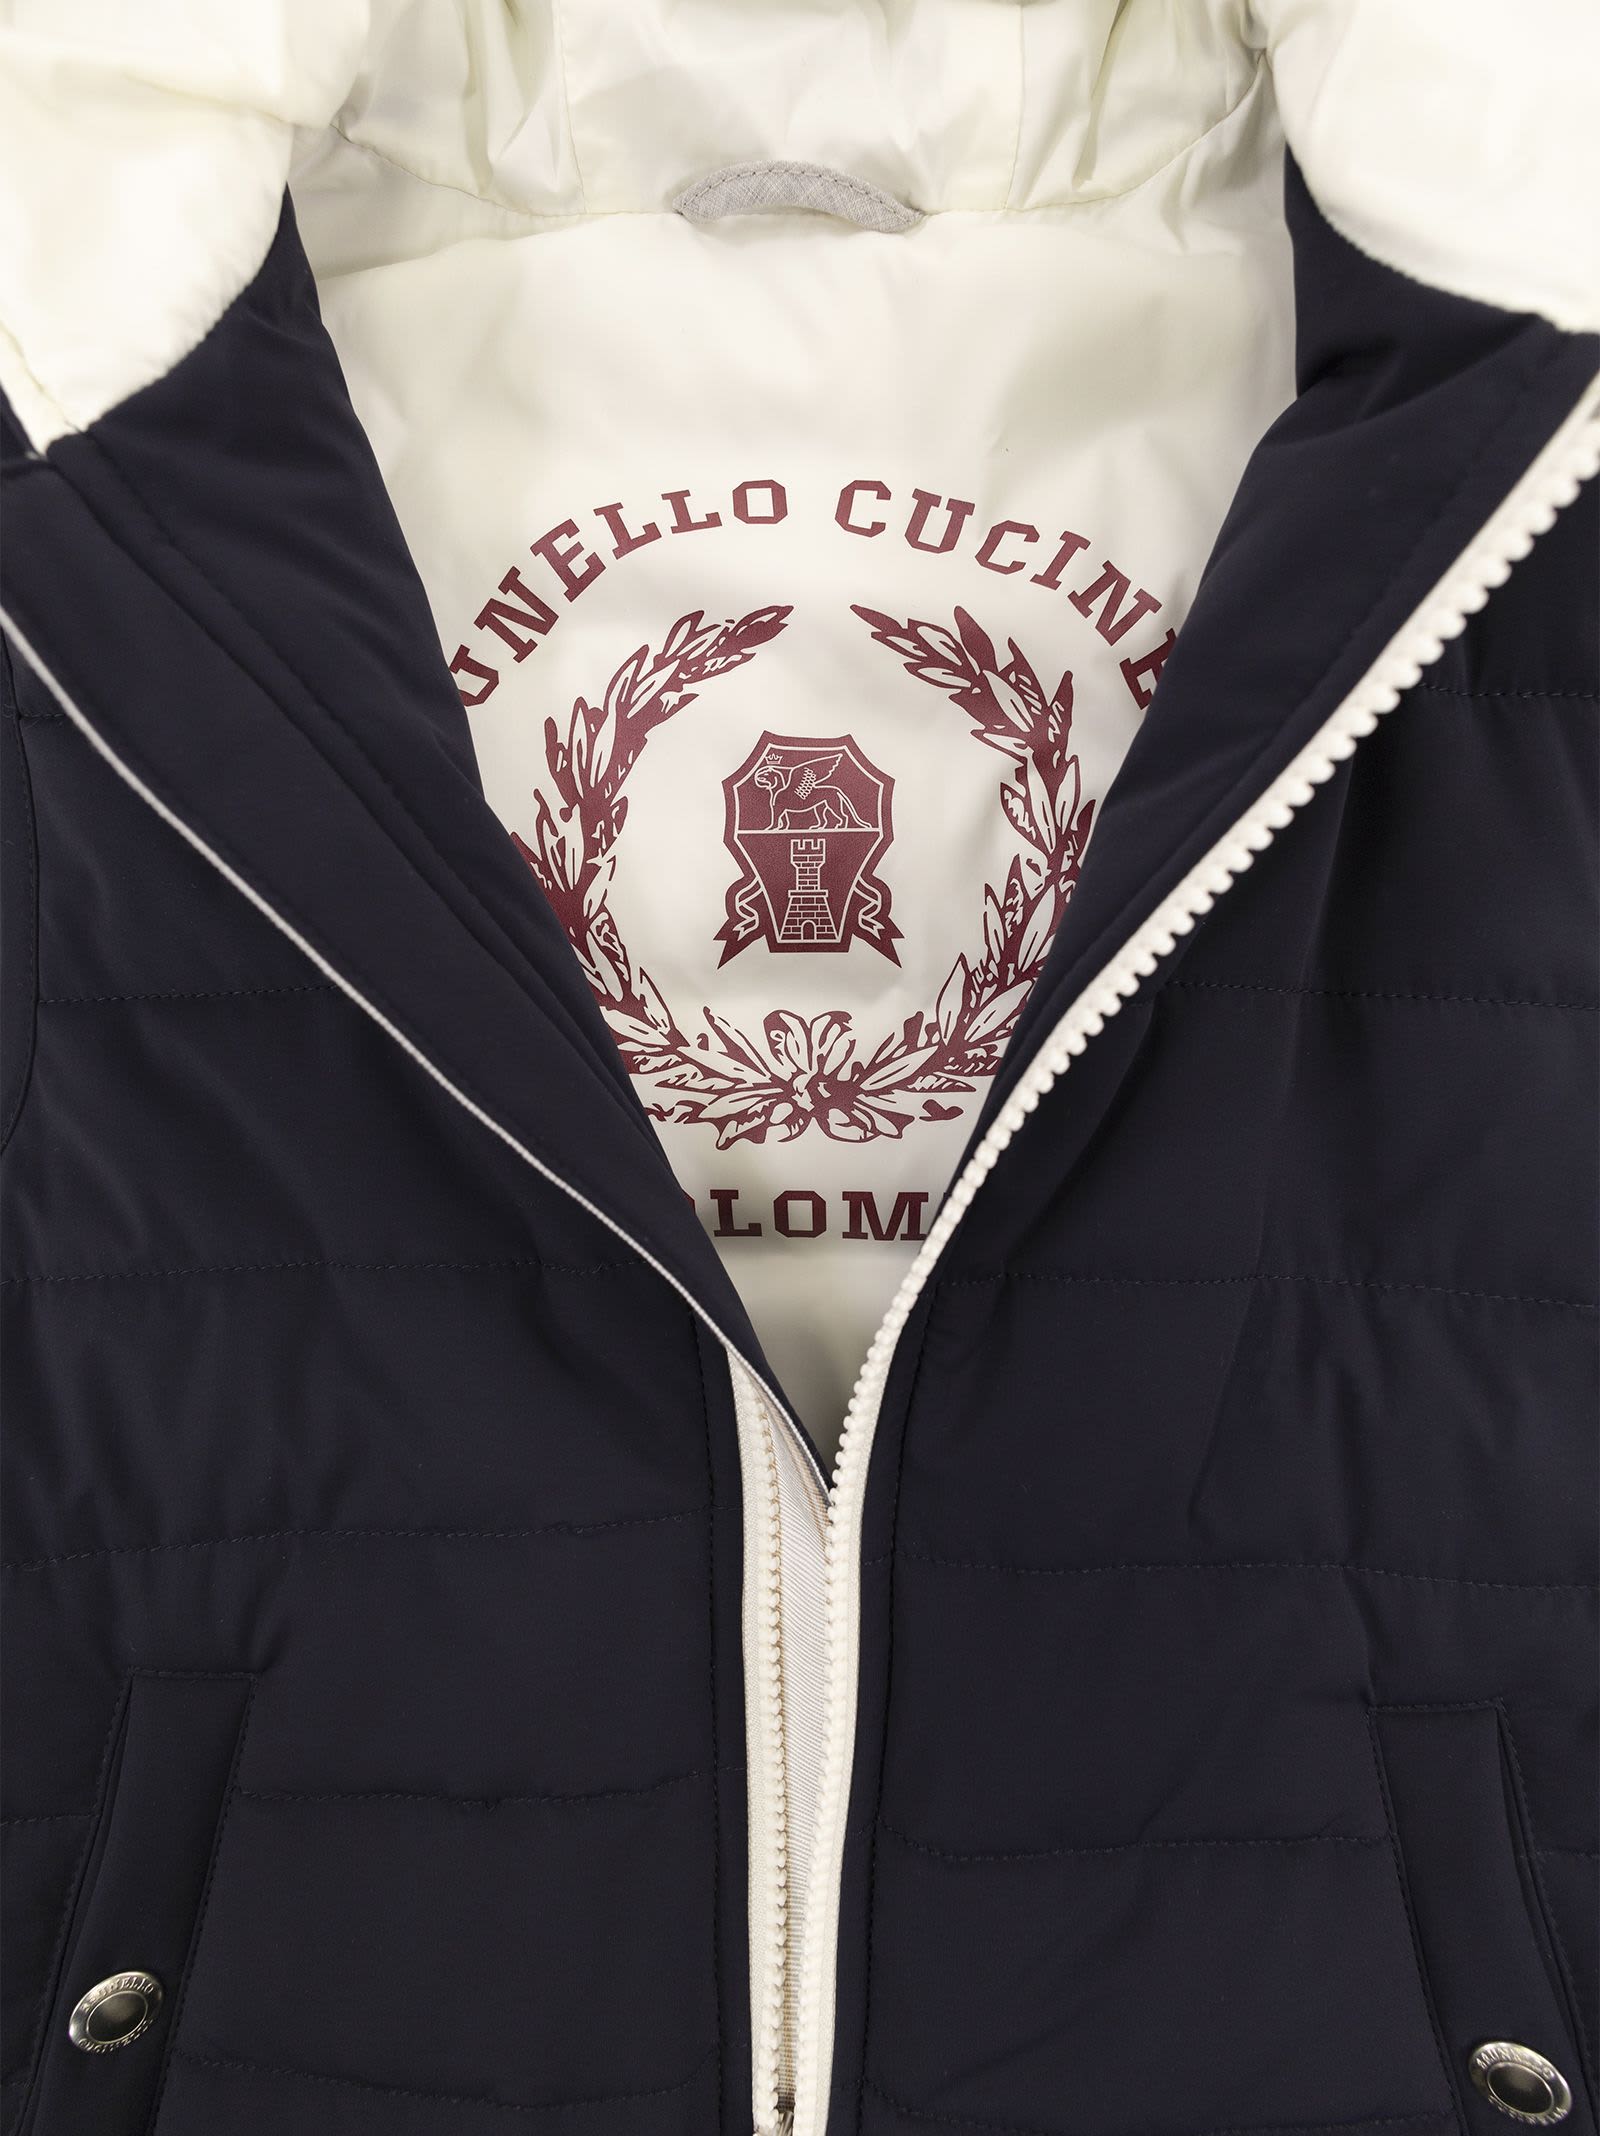 Shop Brunello Cucinelli Water-repellent Nylon Sleeveless Down Jacket With Hood In Navy Blue